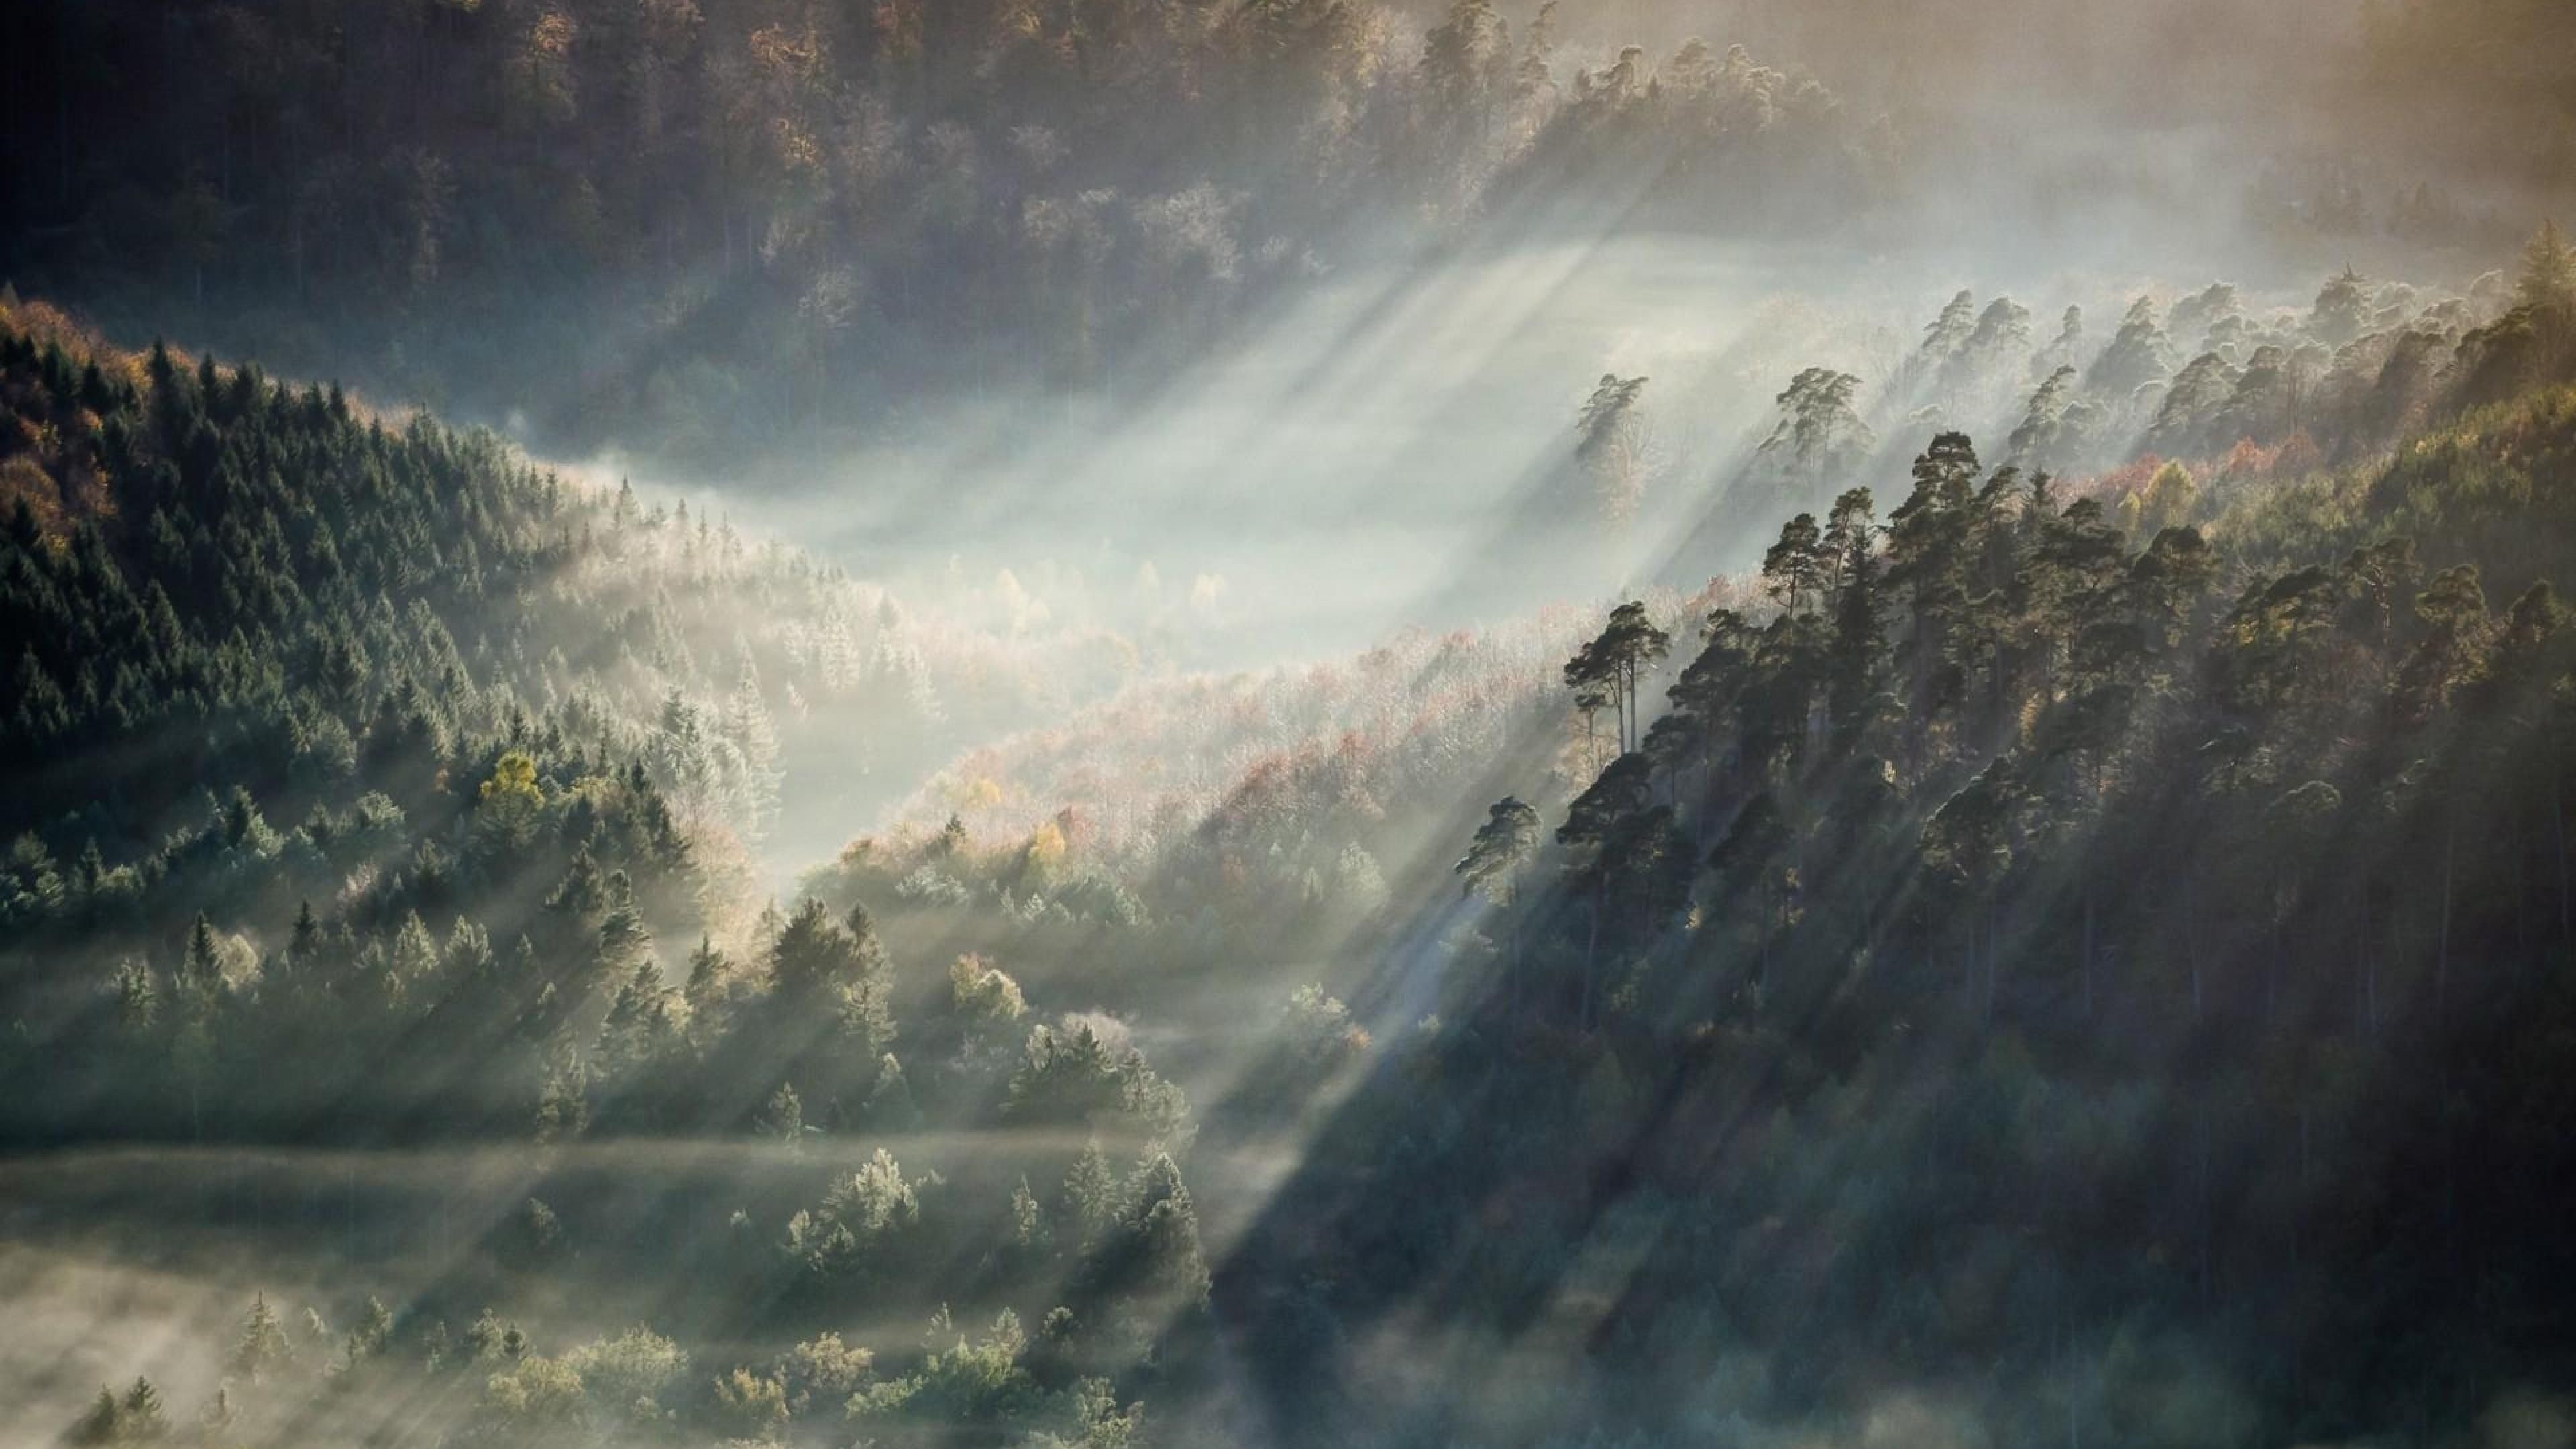 Sunlight shining through the trees in a forest. - Forest, fog, foggy forest, nature